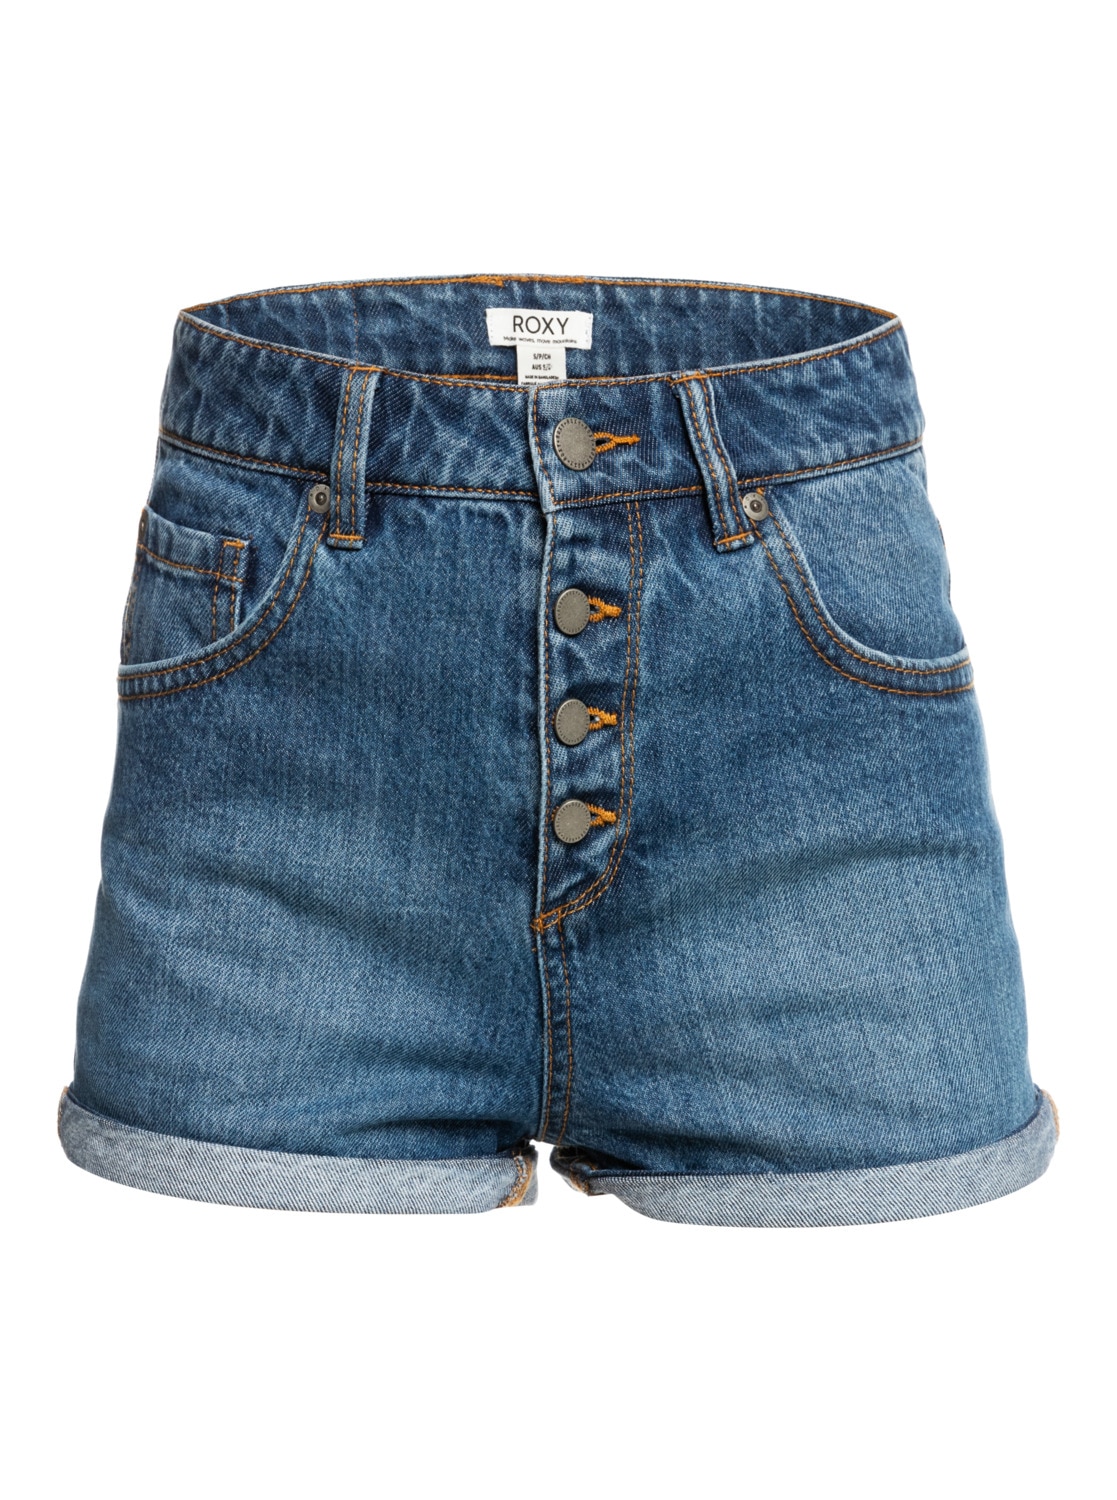 Roxy Jeansshorts »Authentic bei High« online Summer OTTO